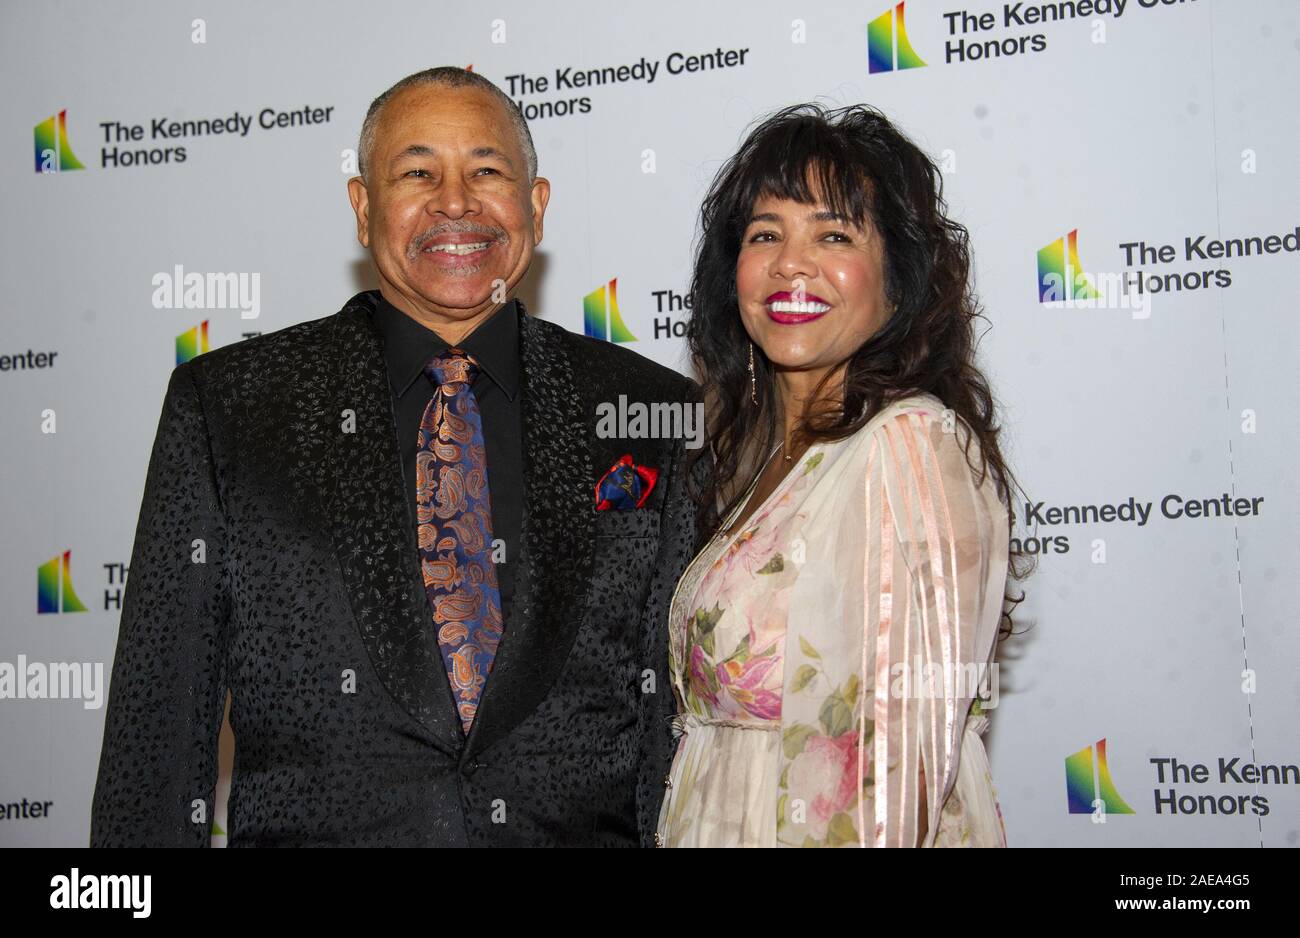 Washington, USA. 07th Dec, 2019. Percussionist Ralph Johnson of Earth, Wind and Fire and his wife, Susan Johnson, arrive for the formal Artist's Dinner honoring the recipients of the 42nd Annual Kennedy Center Honors at the USA Department of State in Washington, DC on Saturday, December 7, 2019. The 2019 honorees are: Earth, Wind & Fire, Sally Field, Linda Ronstadt, Sesame Street, and Michael Tilson Thomas.Credit: Ron Sachs/Pool via CNP Credit: UPI/Alamy Live News Stock Photo